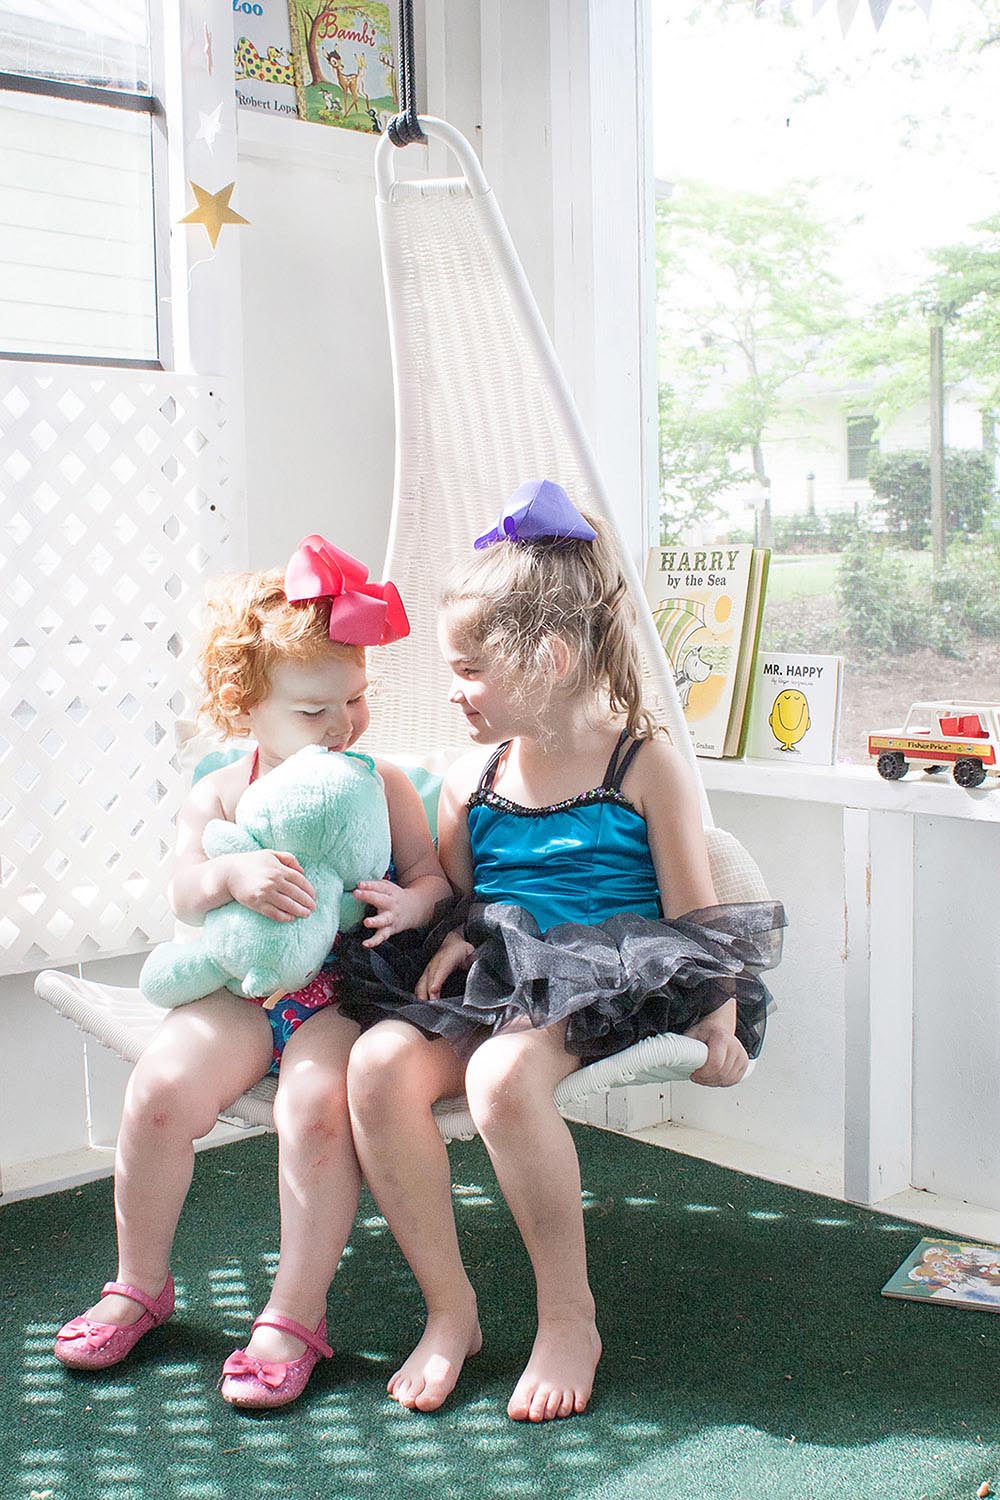 Two young girls sit in a white chair next to a window inside a playhouse.